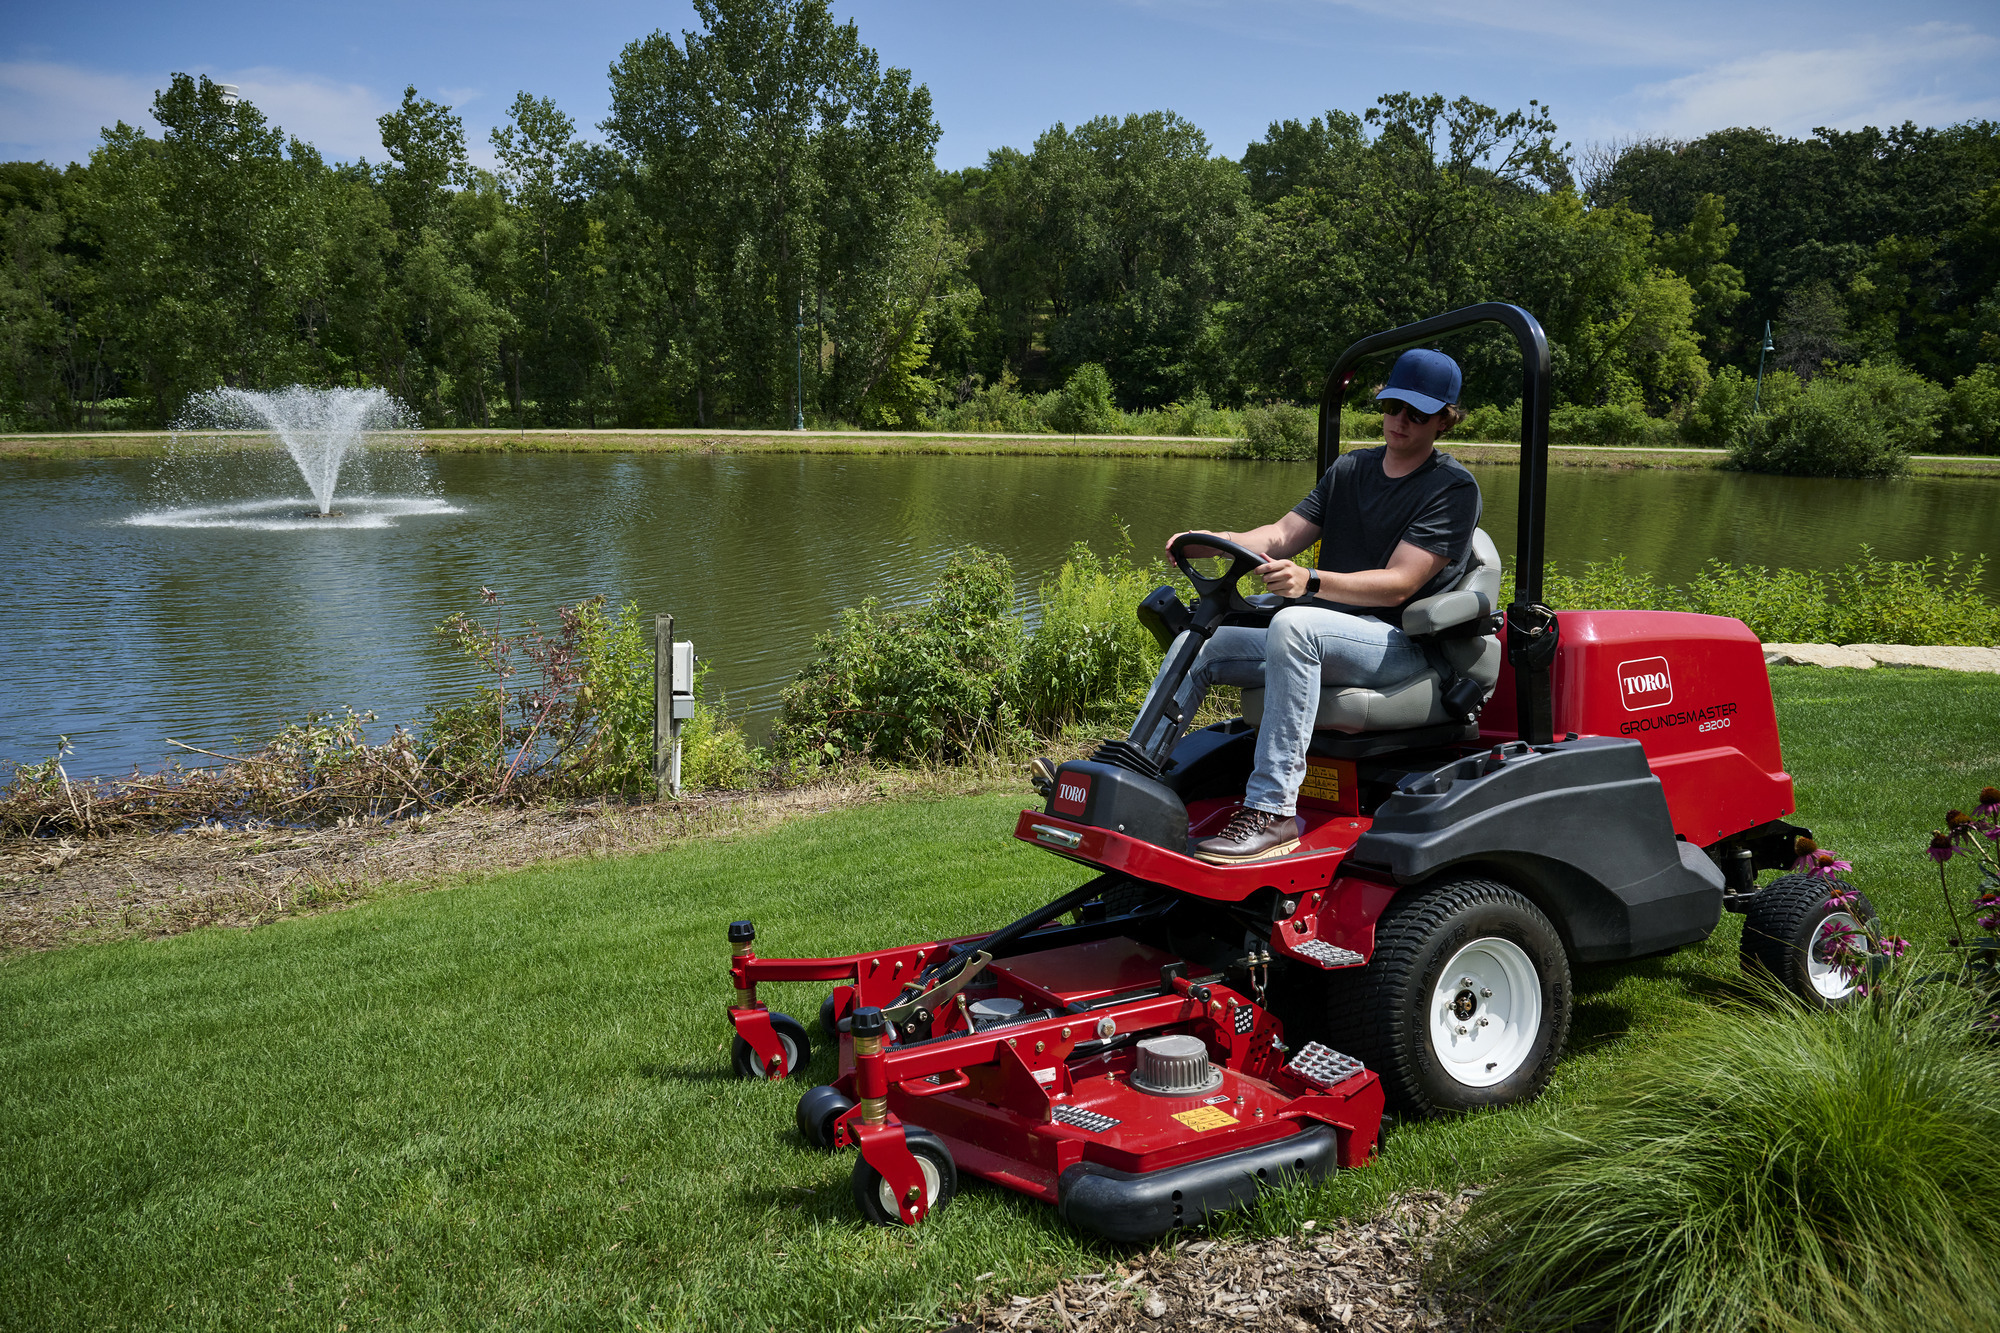 Introducing the Toro Groundsmaster e3200 - All-Day Battery Power, All-Day Performance